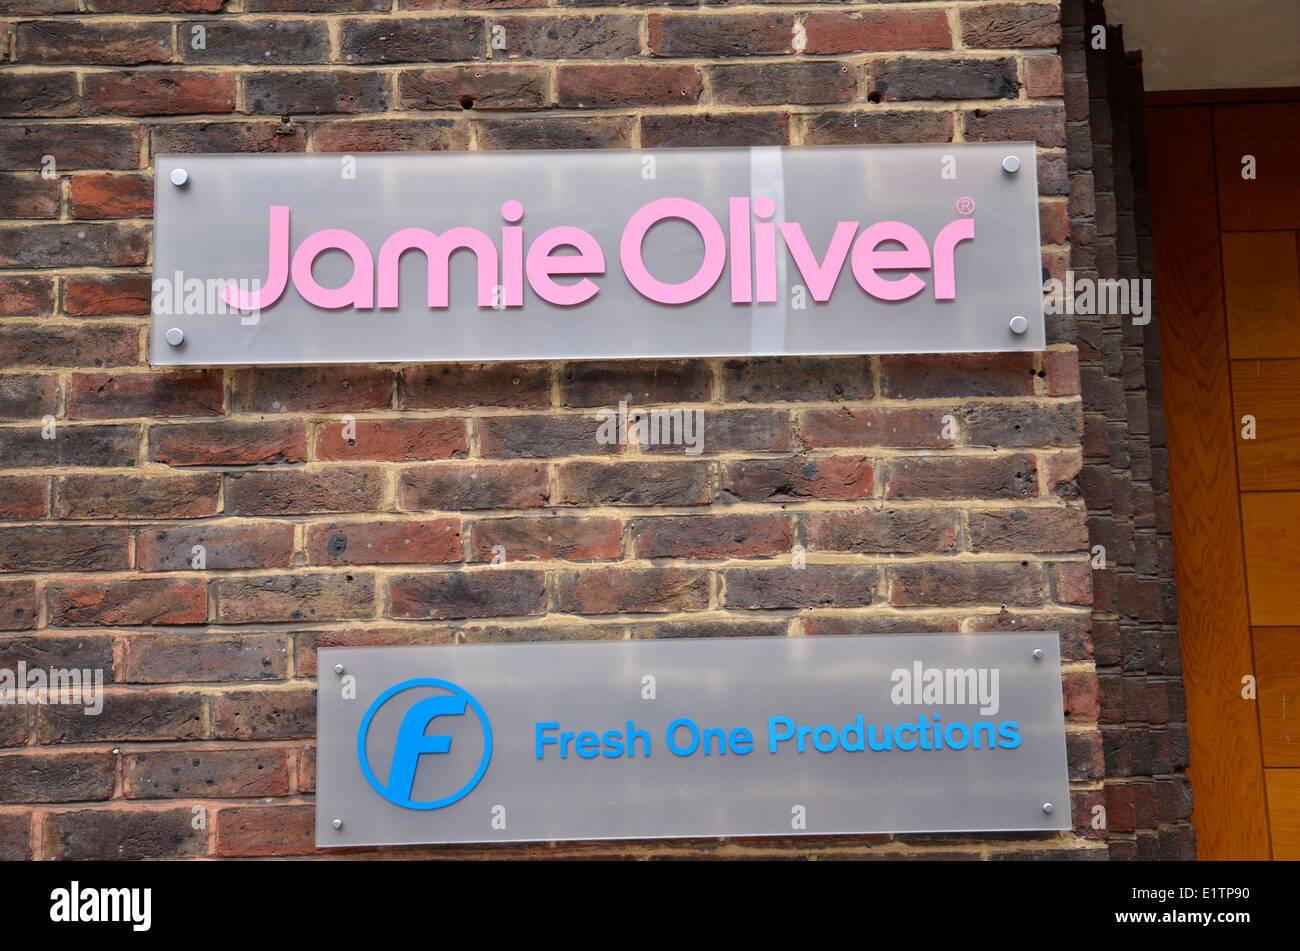 Jamie Oliver's production company Fresh One Productions Stock Photo